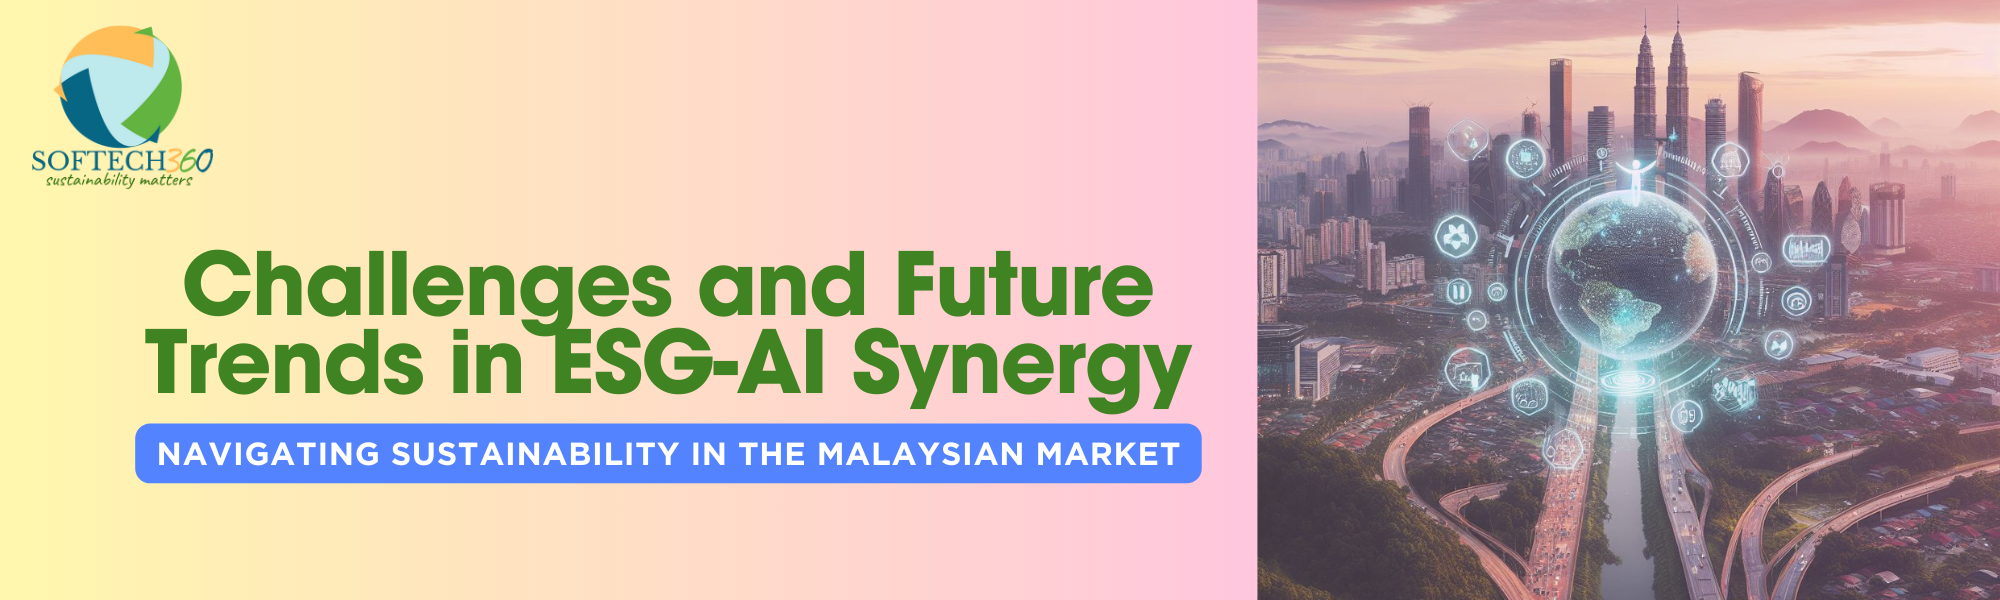 Challenges and Future Trends in ESG-AI Synergy: Navigating Sustainability in the Malaysian Market